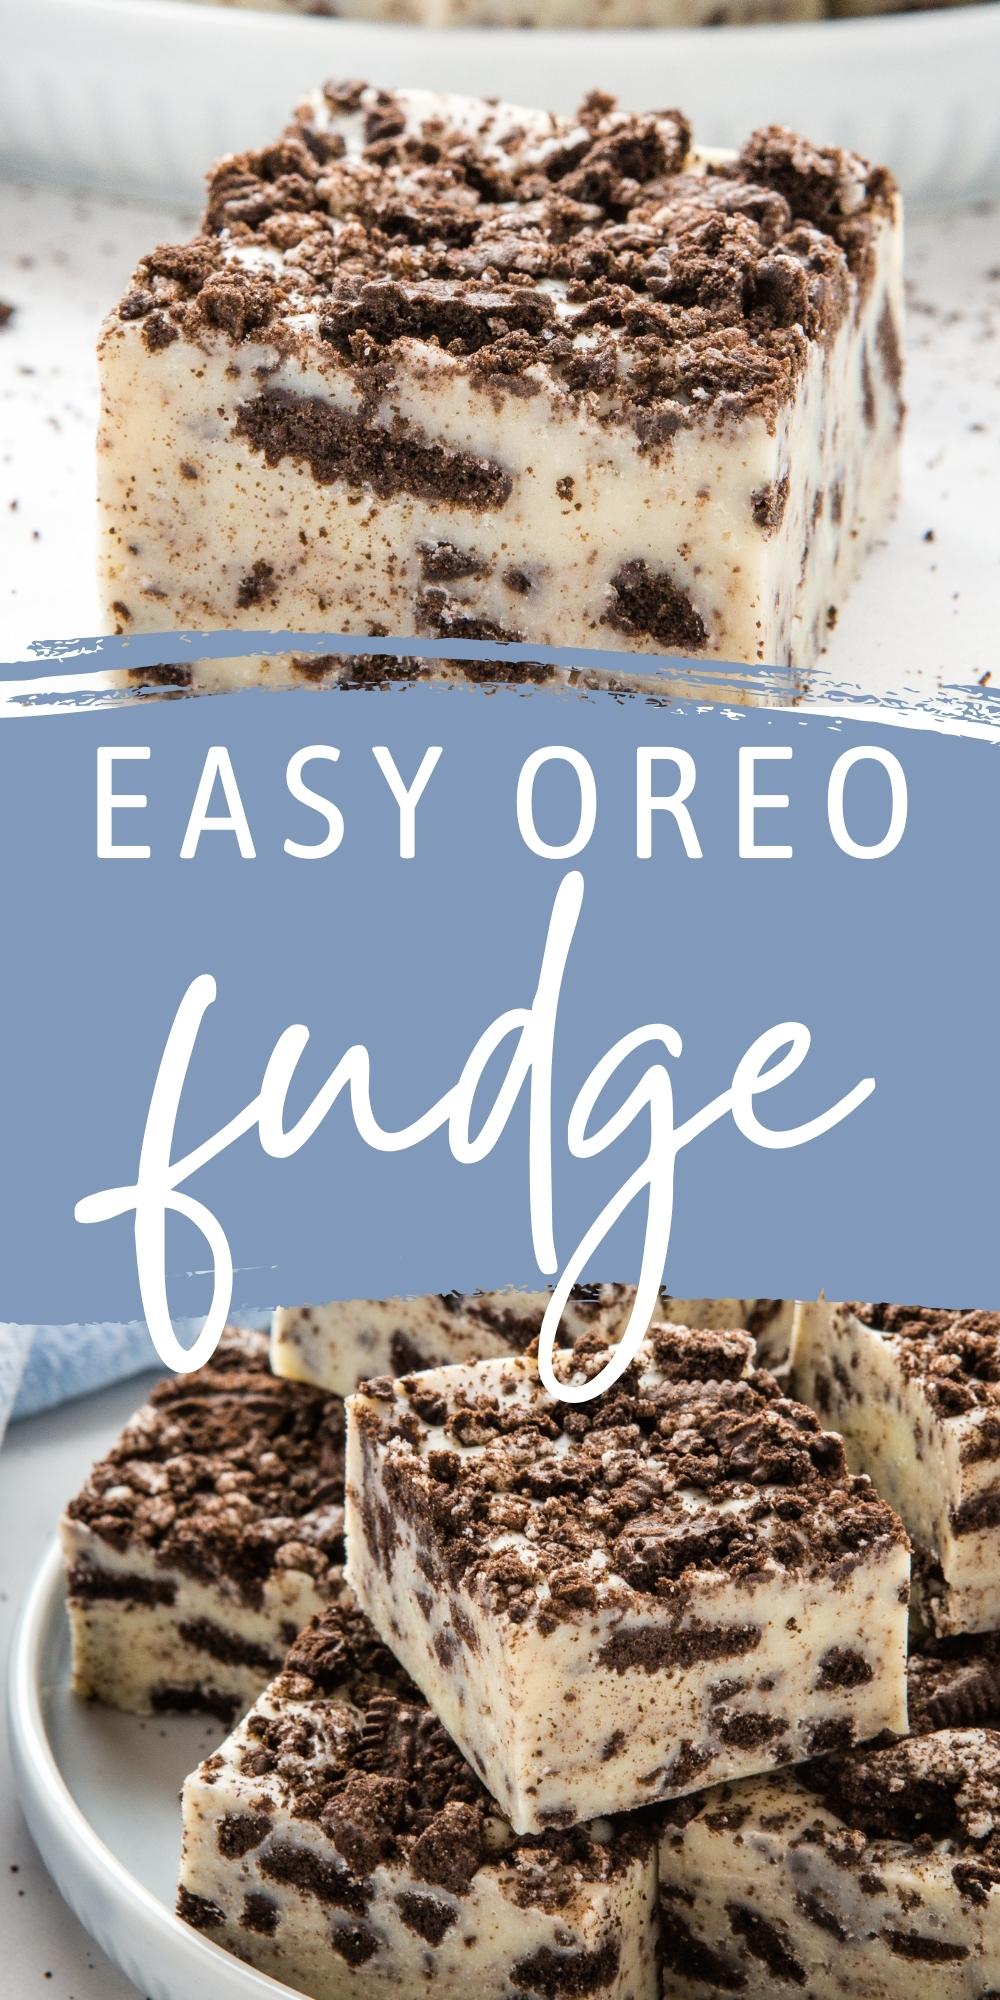 This Oreo Fudge recipe is the perfect Christmas fudge recipe for the holidays! Easy to make with only 3 simple ingredients! Recipe from thebusybaker.ca! #fudge #oreofudge #dessert #treat #christmasbaking #holidaydessert #christmasfudge via @busybakerblog